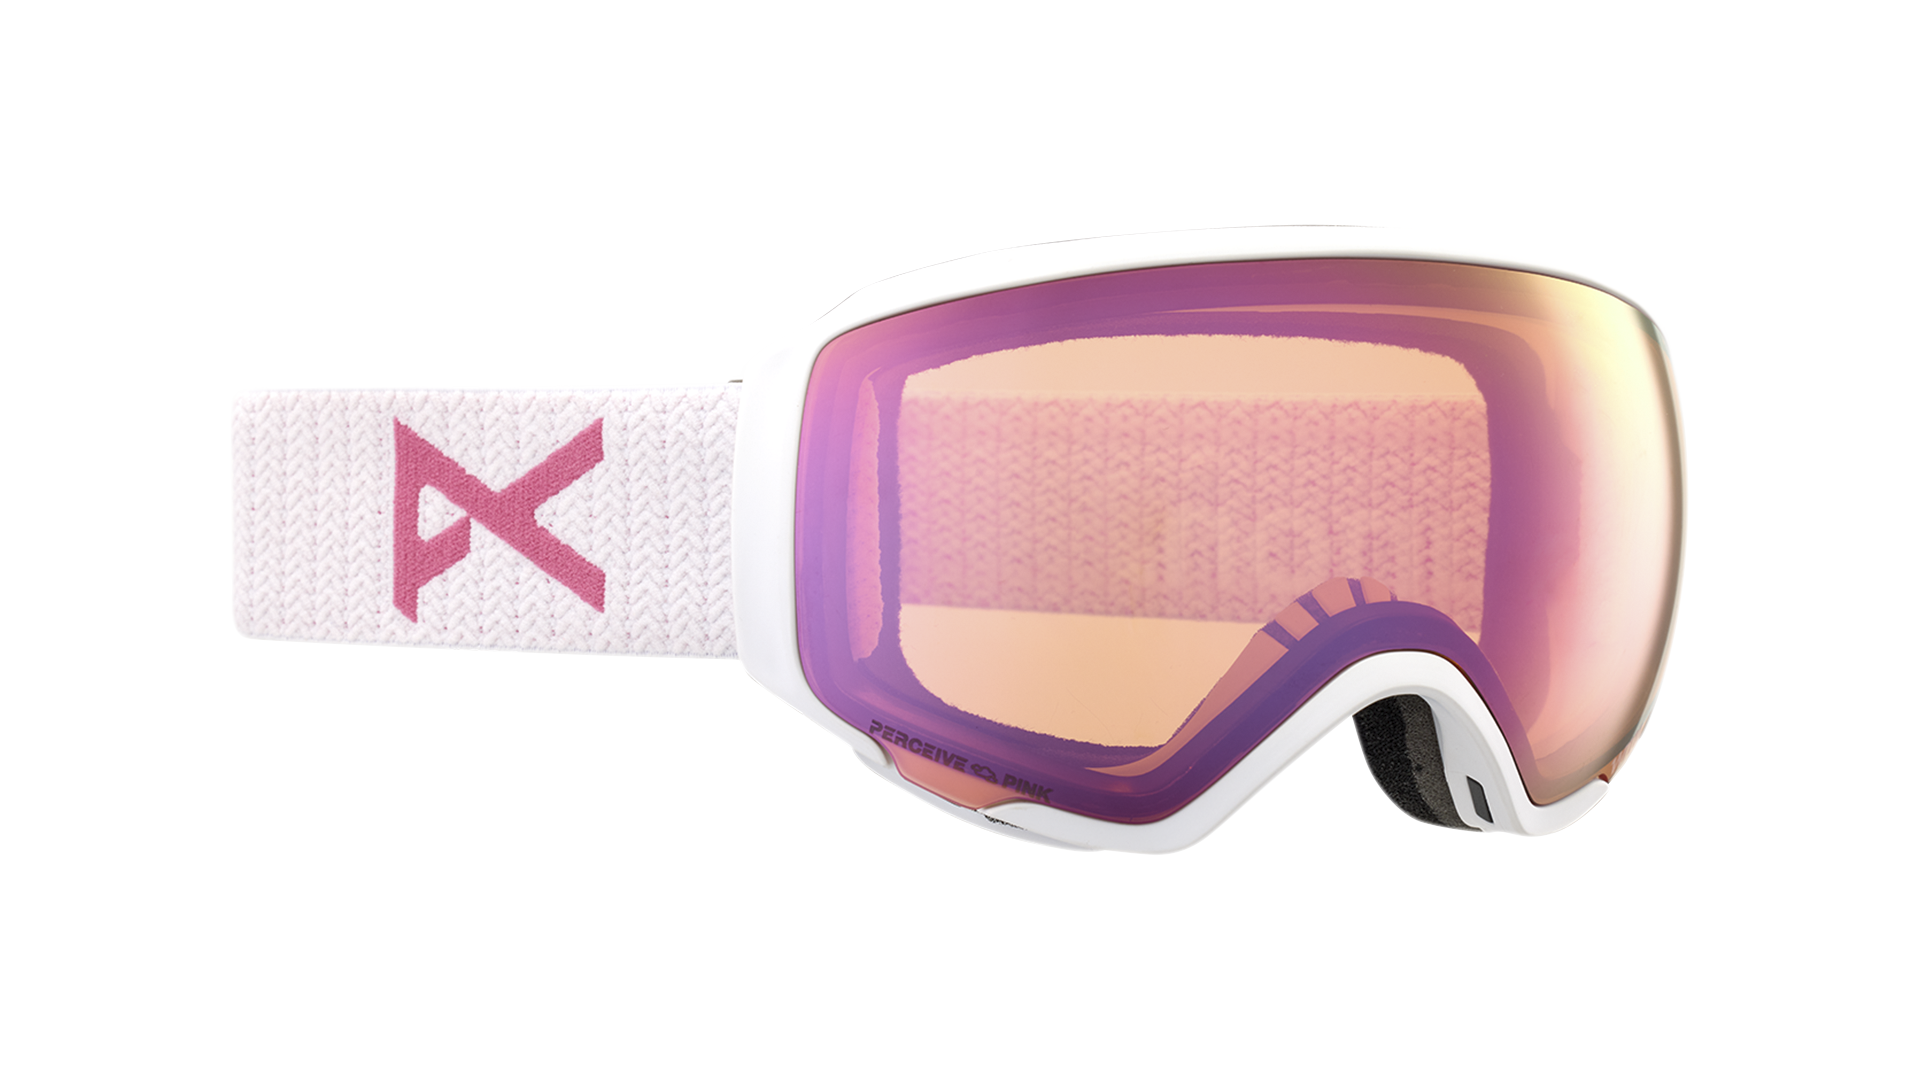 anon wm1 mfi snow goggle in white with perceive cloudy pink lens